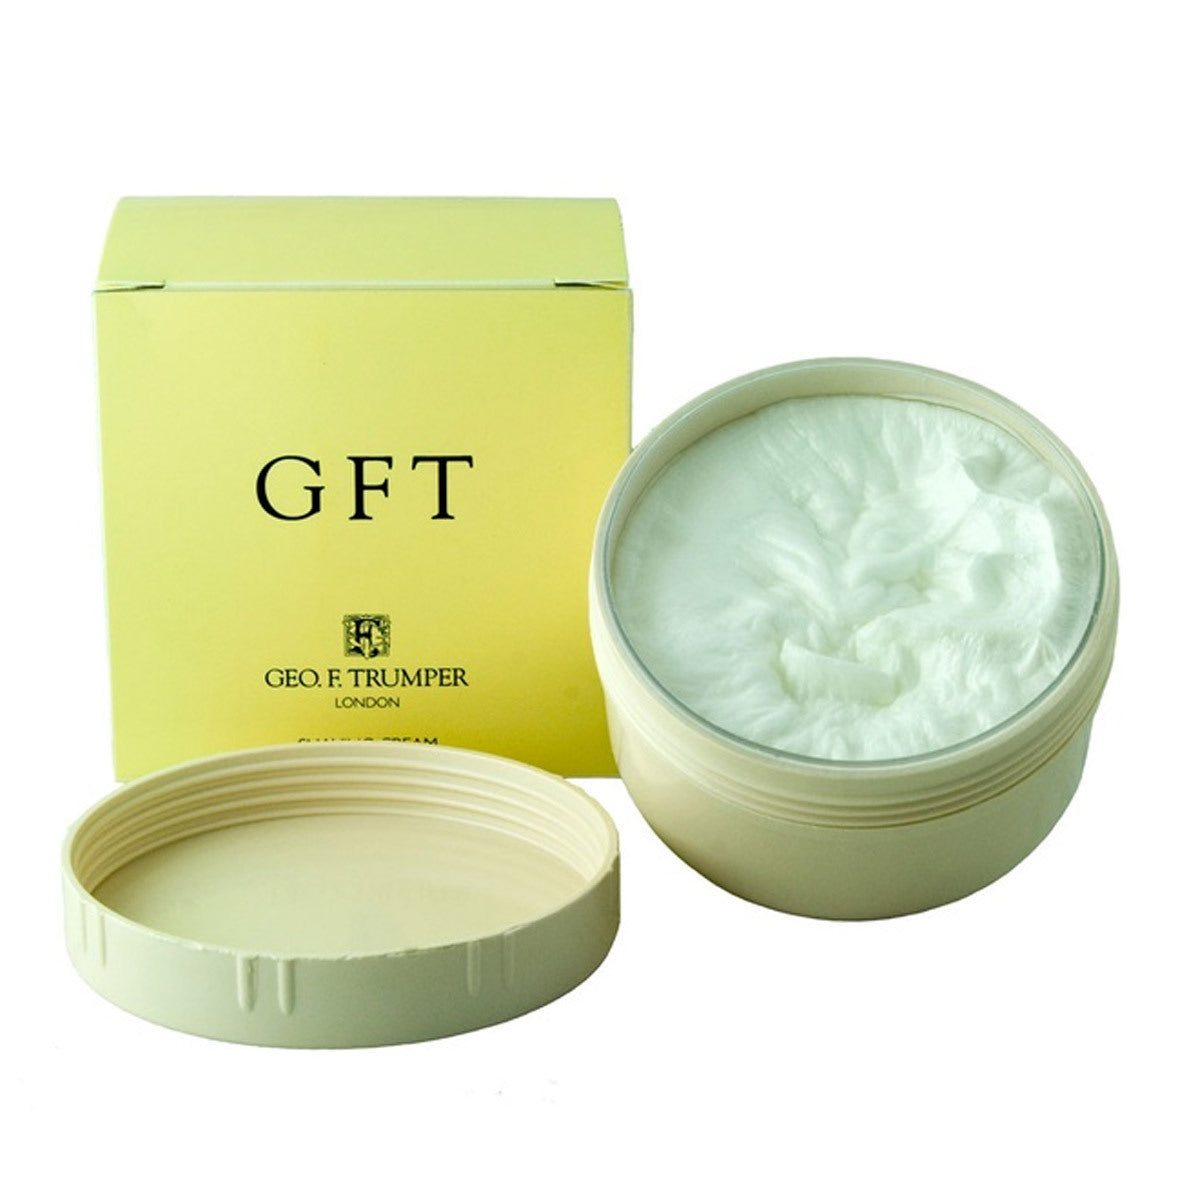 Primary image of GFT Shaving Cream in a Bowl